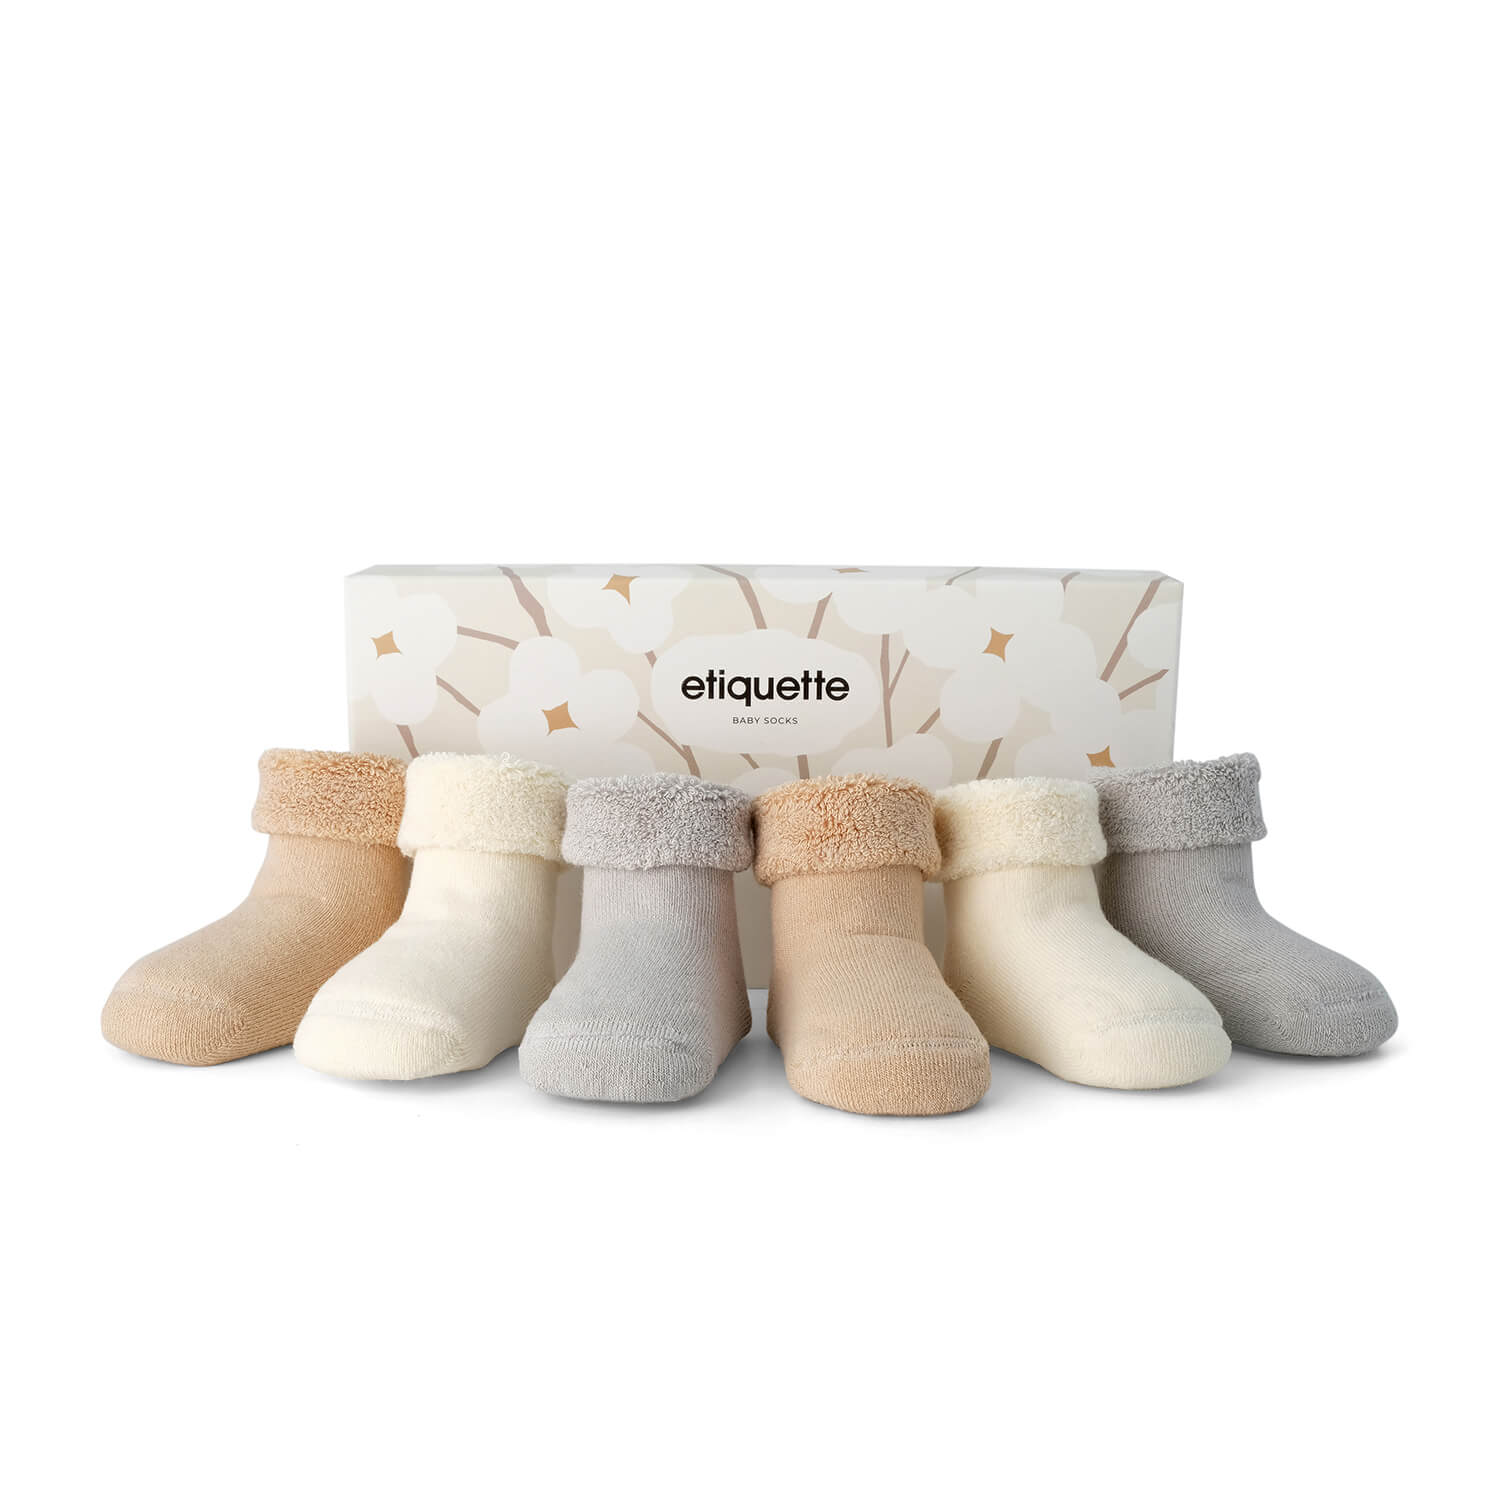 Organic Baby Socks - Pure Terry Baby Socks Gift Box - neutral cozy terry baby socks - main view⎪Lil'Etiquette Clothiers